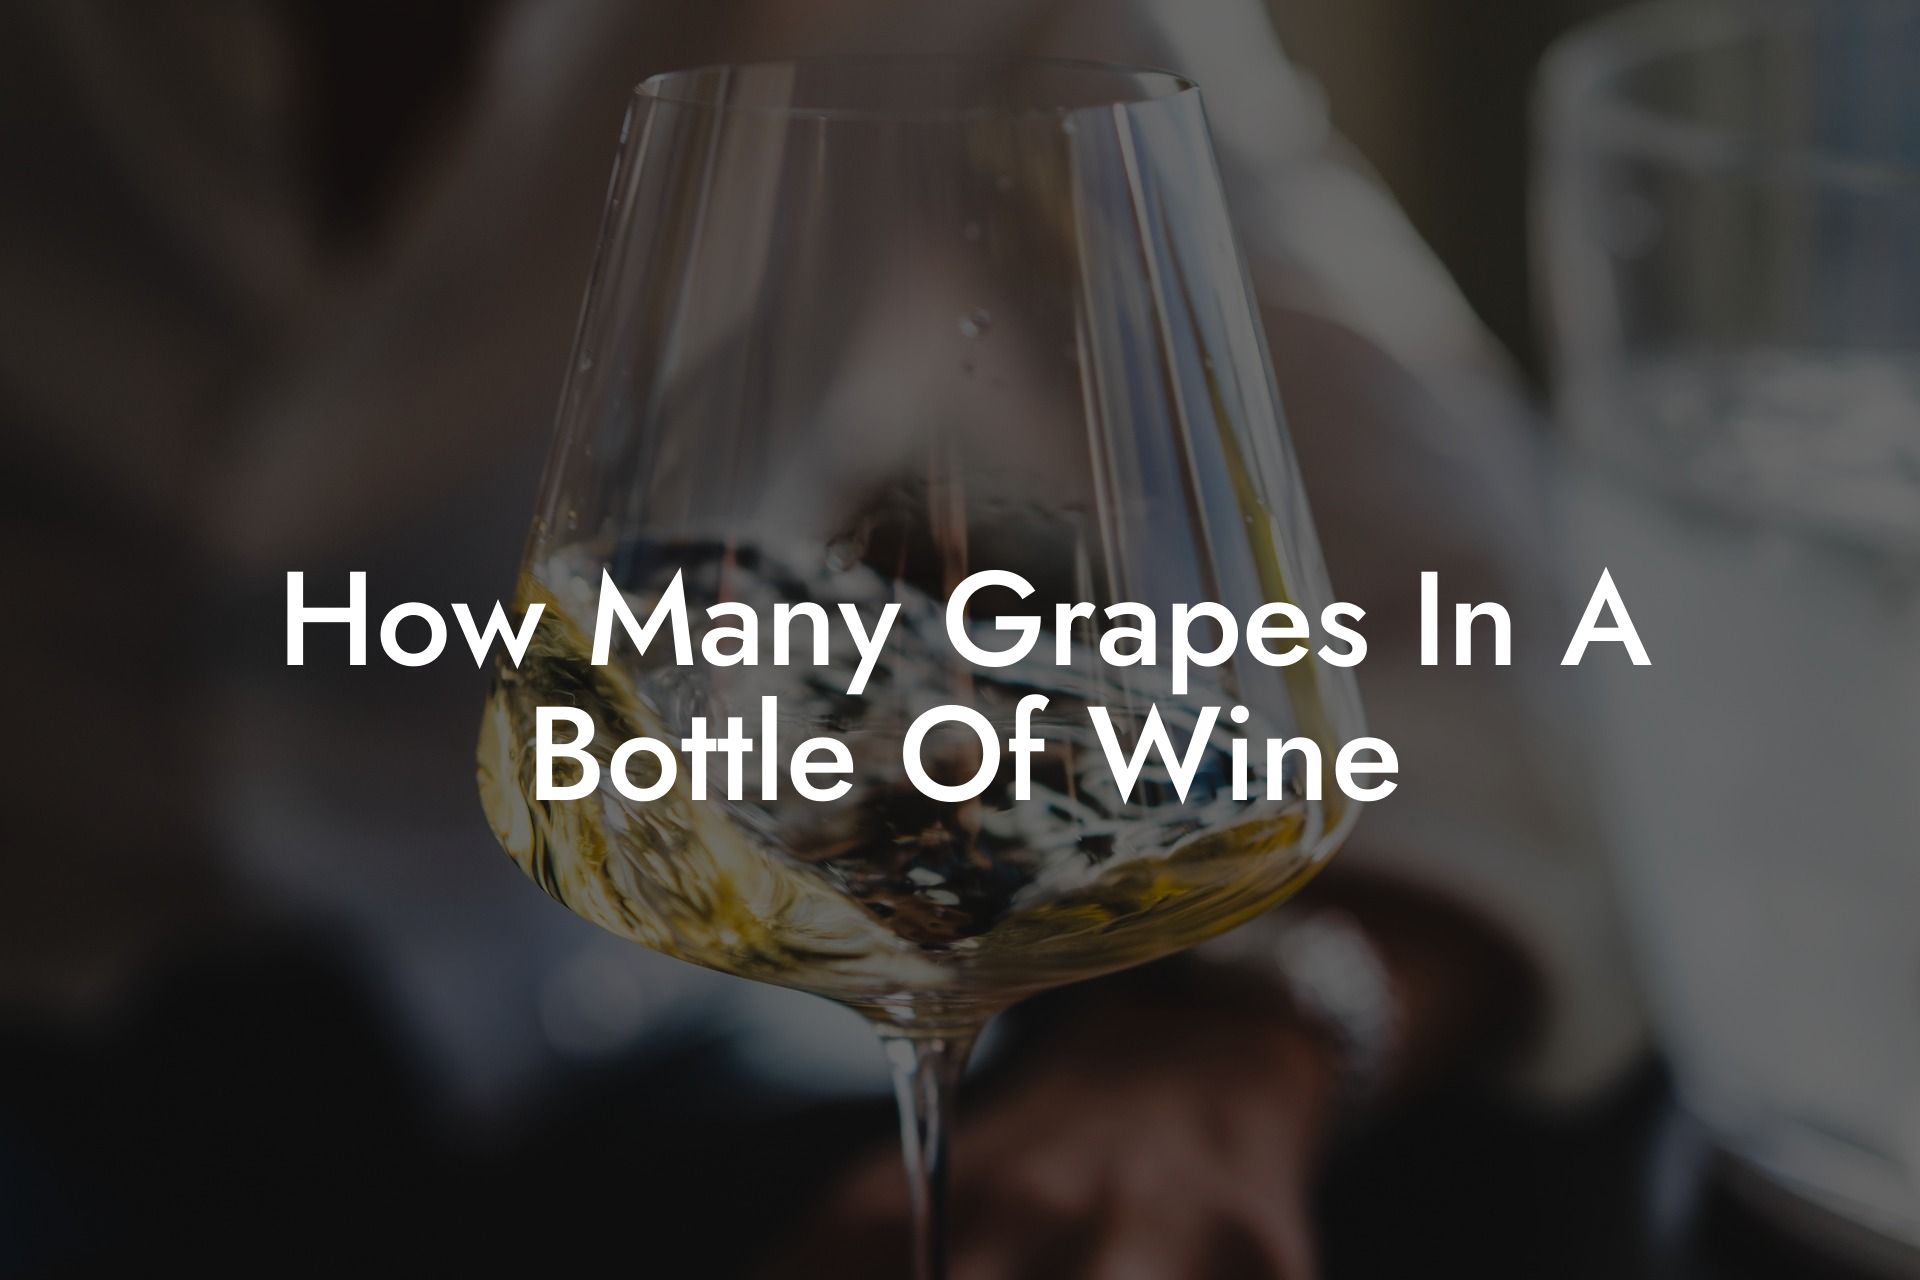 How Many Grapes In A Bottle Of Wine